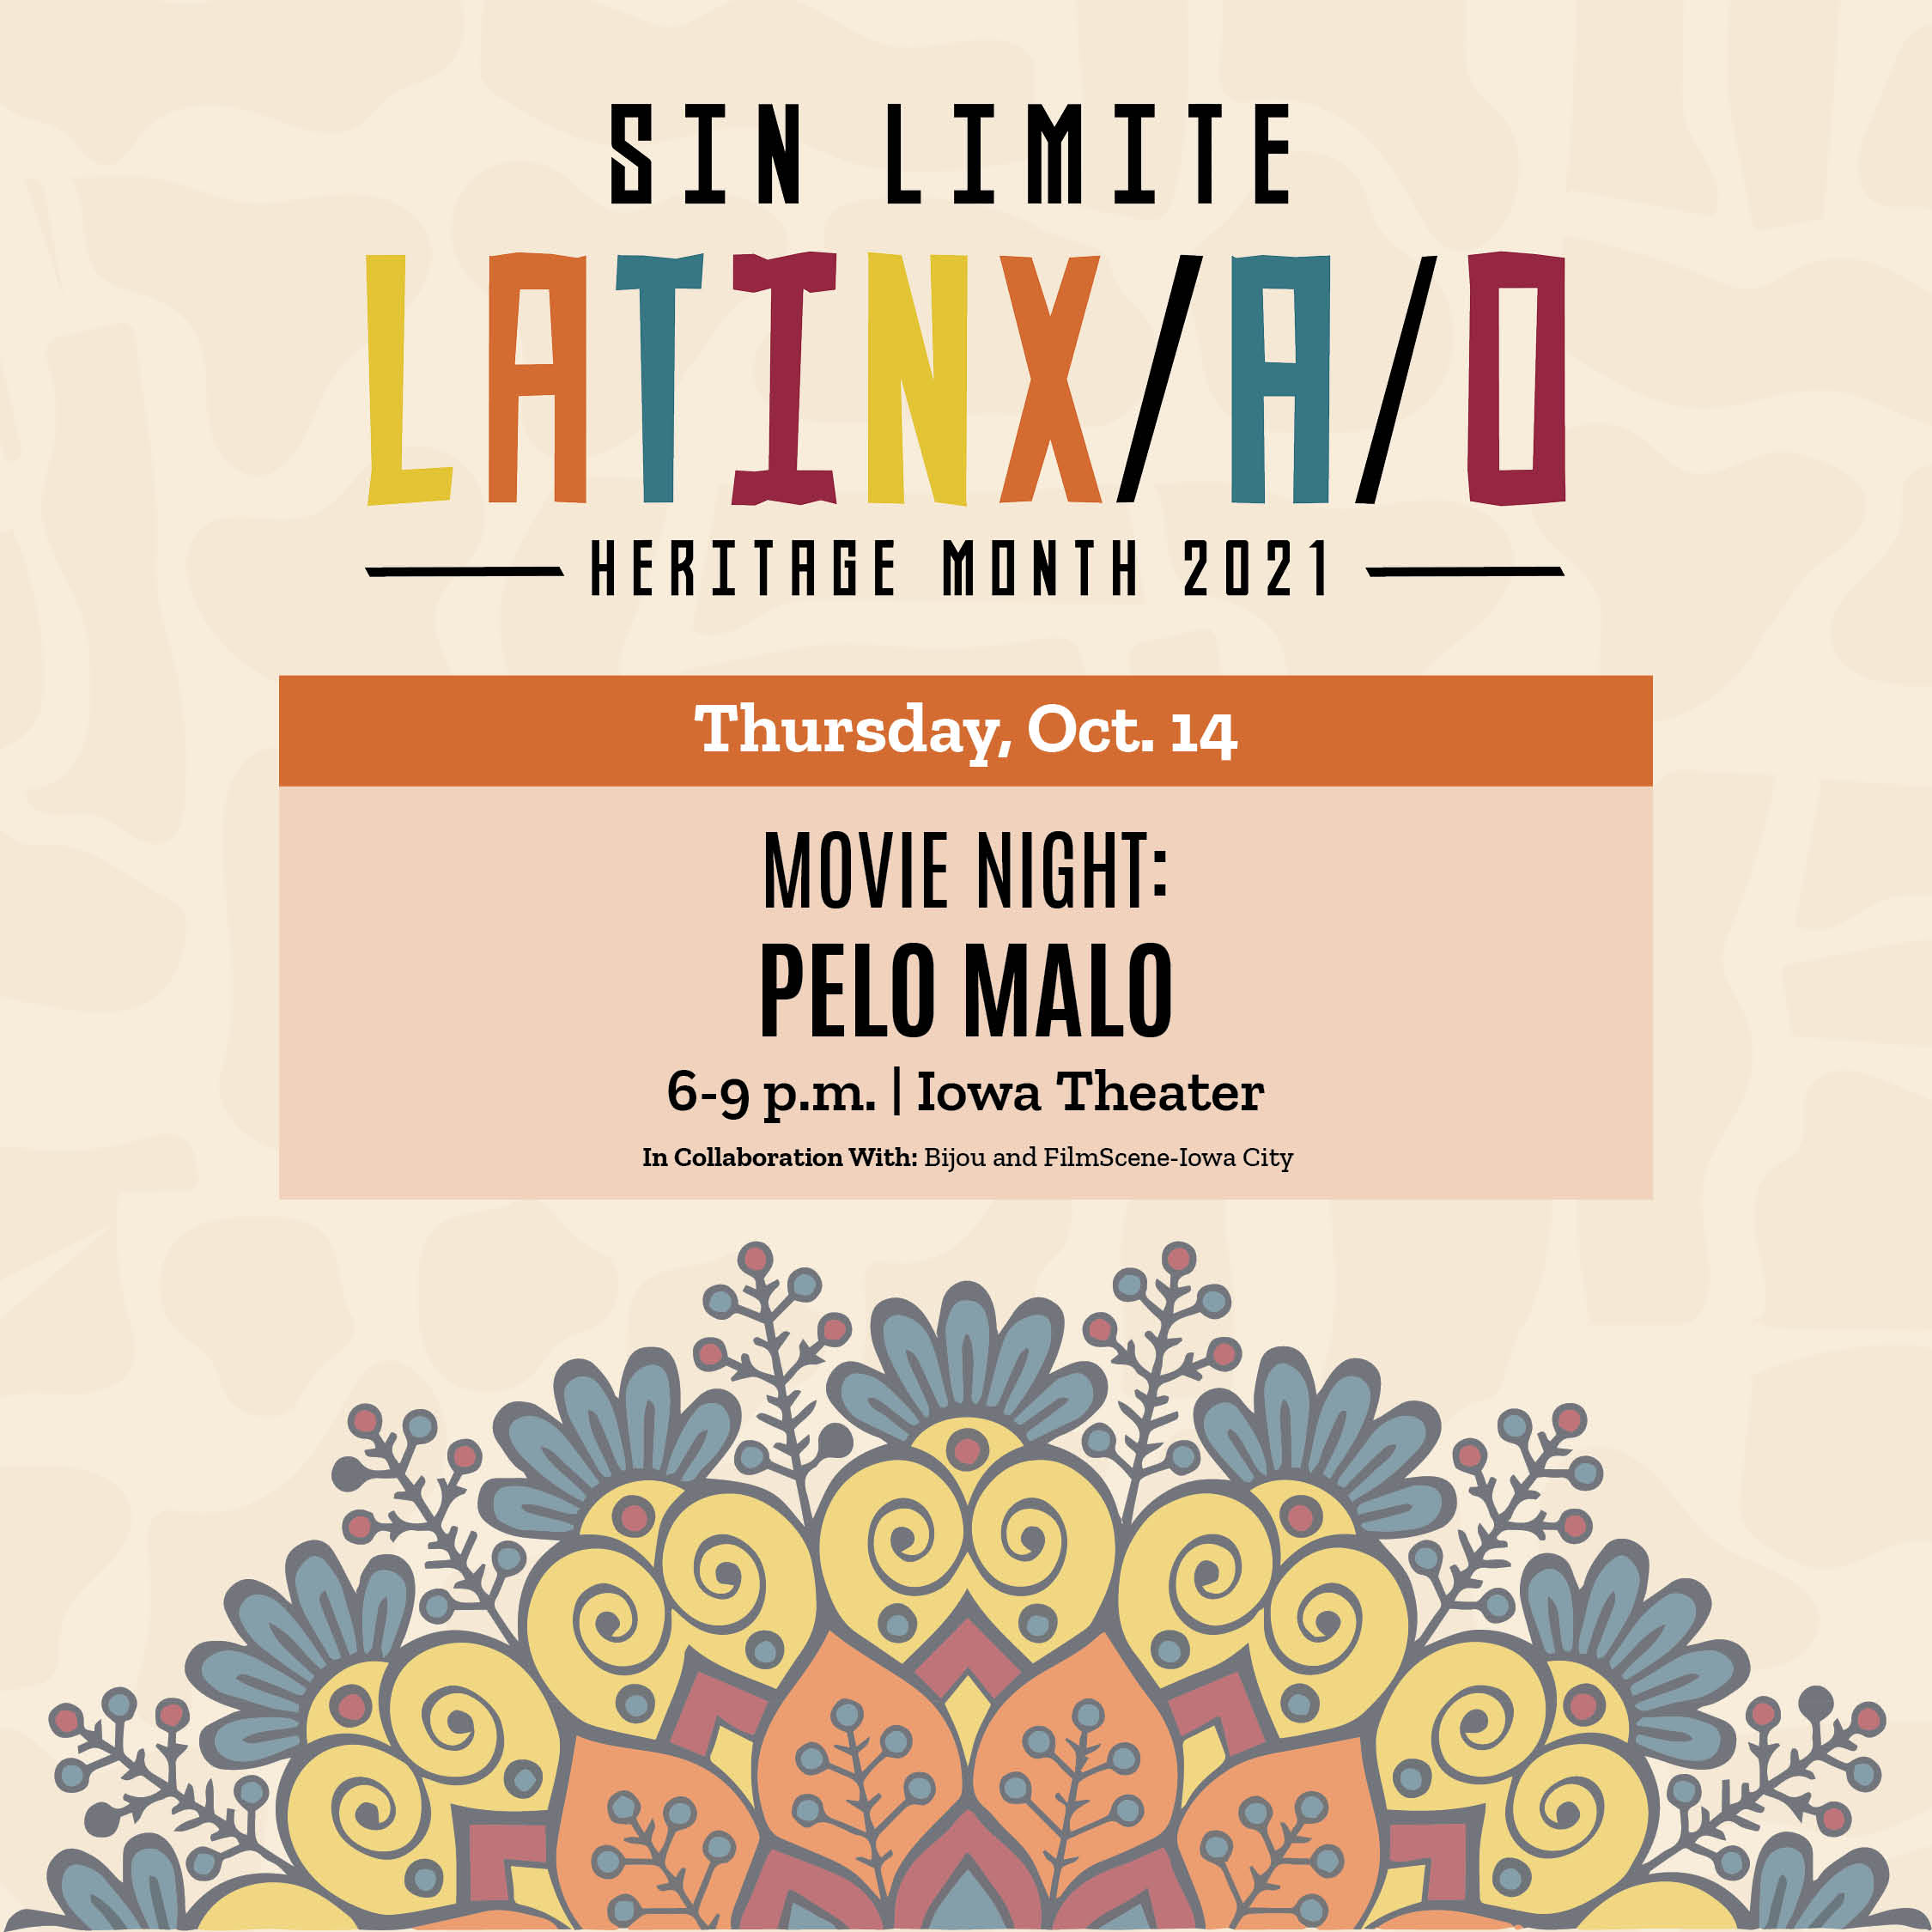 A floral design graphic with text that says 'SIN LIMITE LATINX/A/O HERITAGE MONTH 2021 Thursday Oct. 14 MOVIE NIGHT: PELO MALO 6-9 p.m. lowa Theater Collaboration With: Bijou FilmScene lowa City'